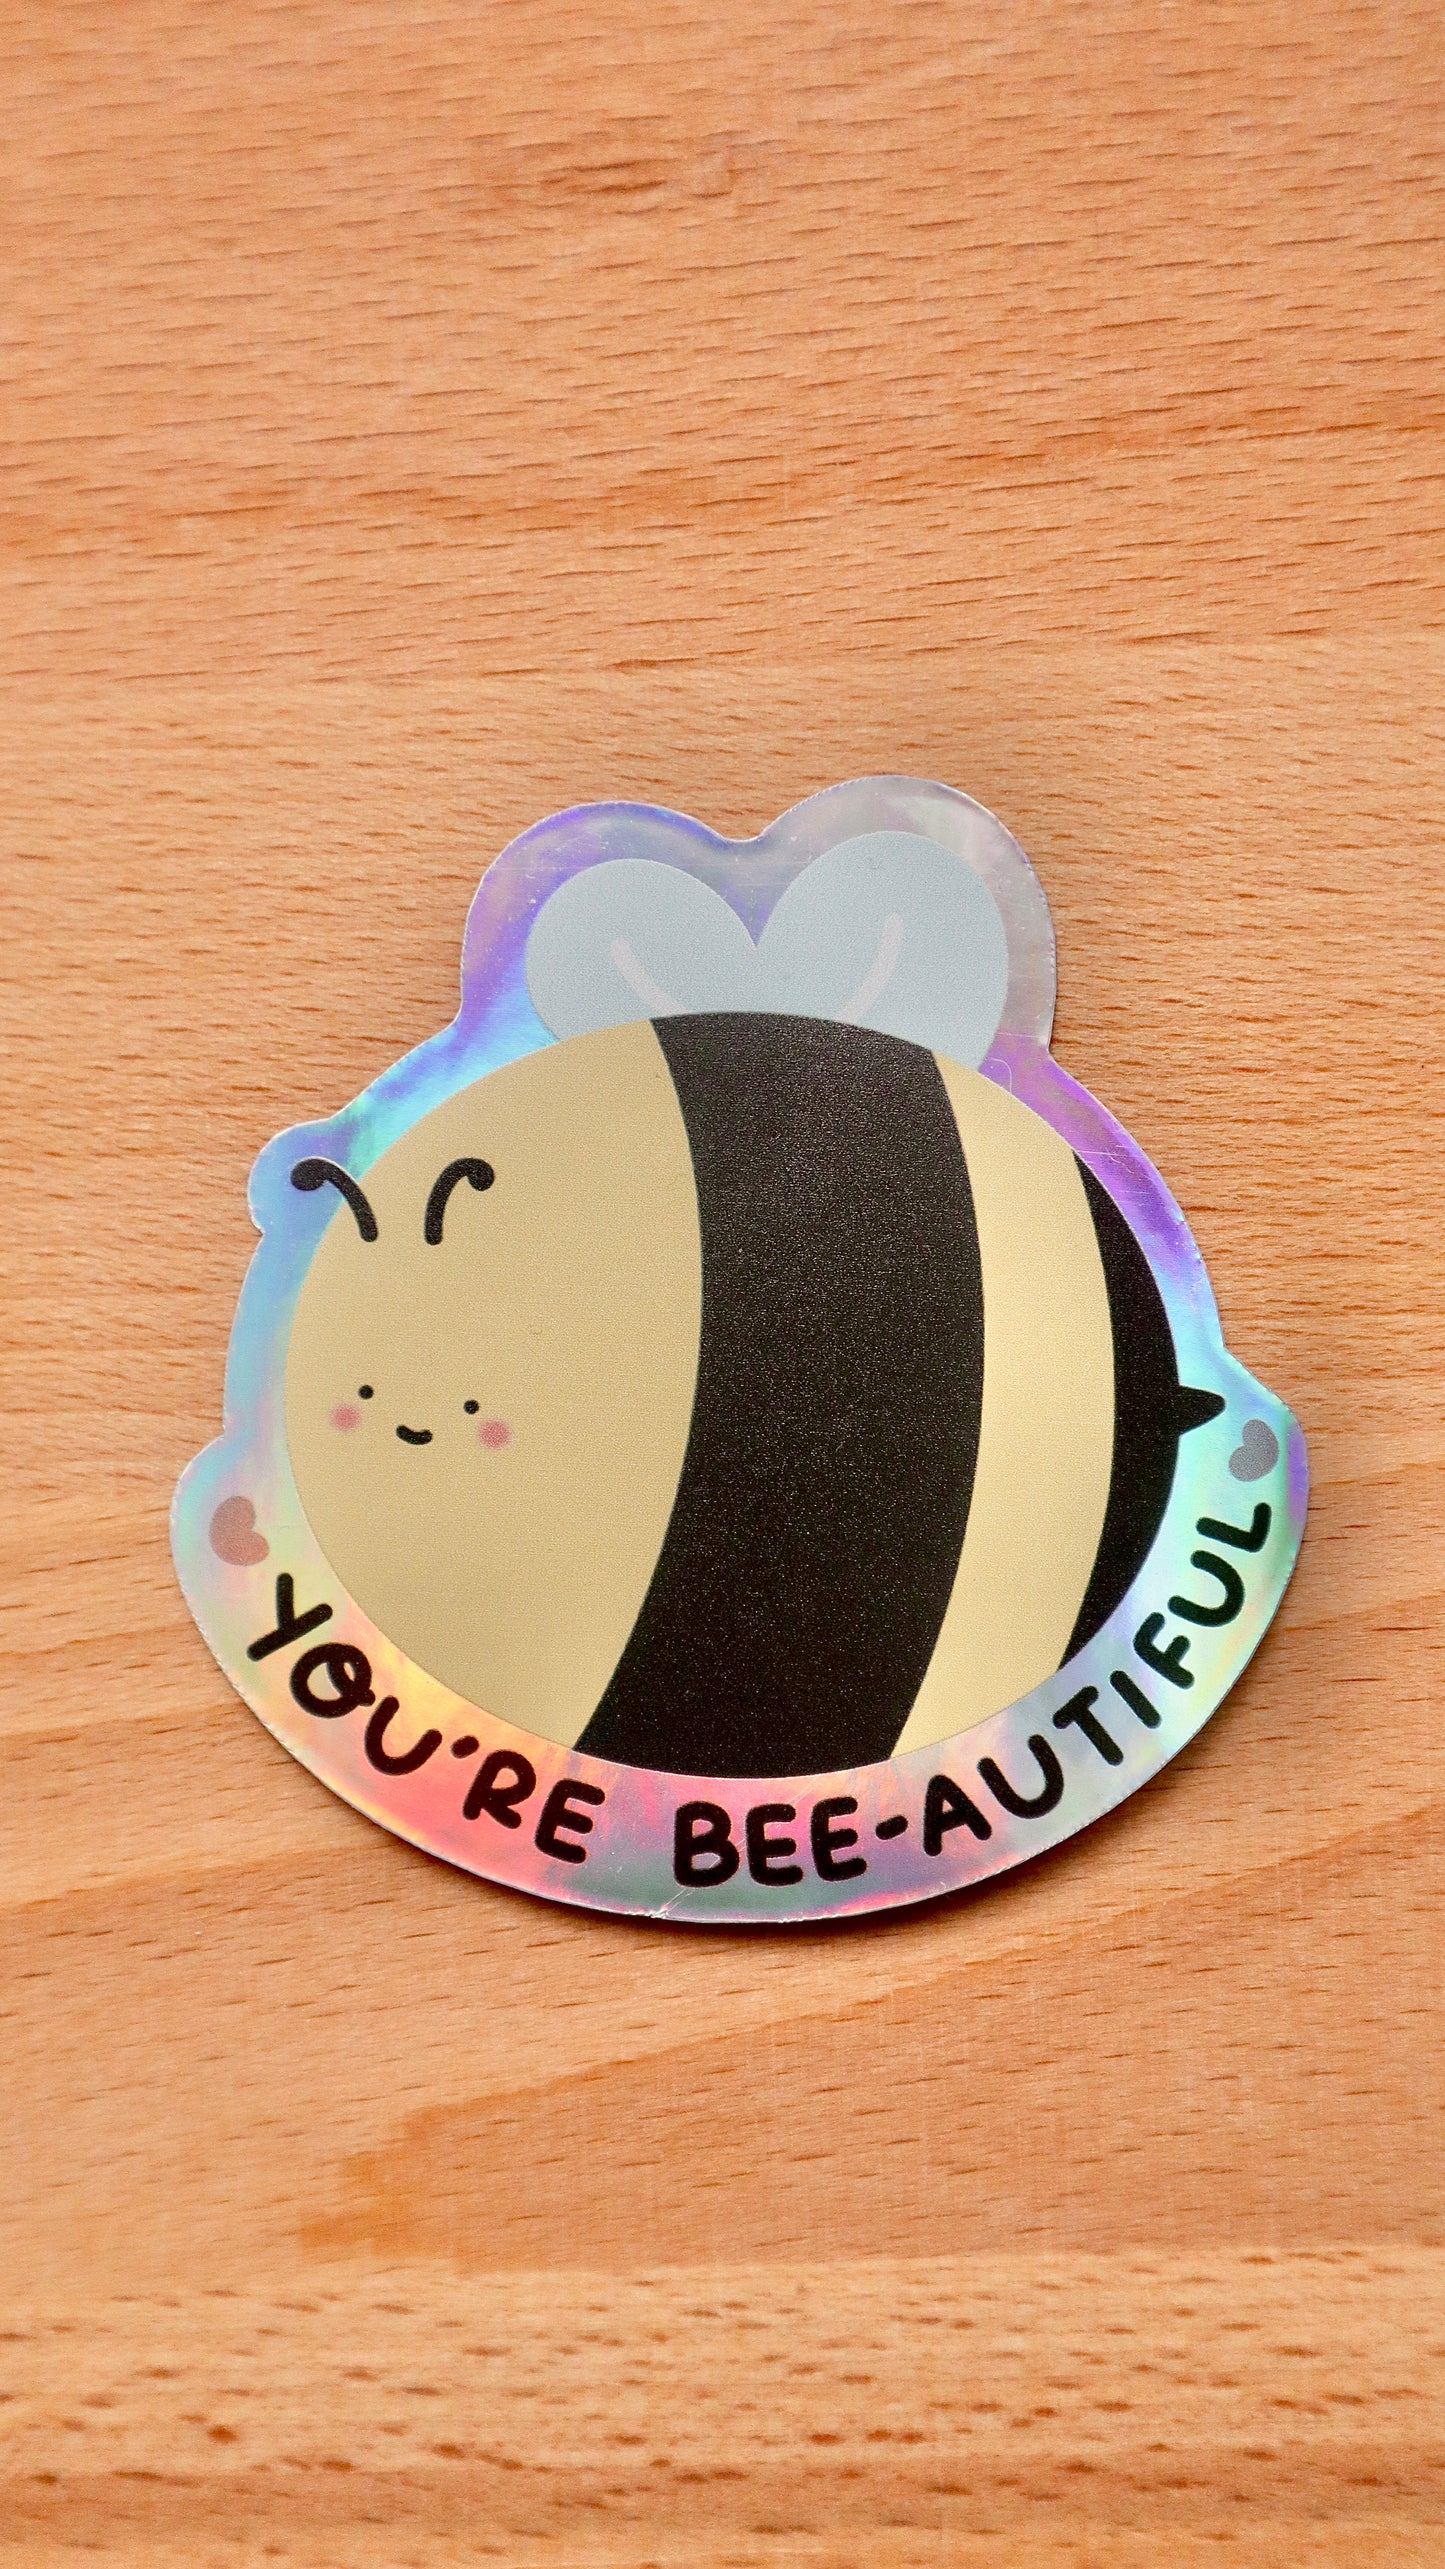 You’re Bee-autiful Holographic Die-cut Sticker